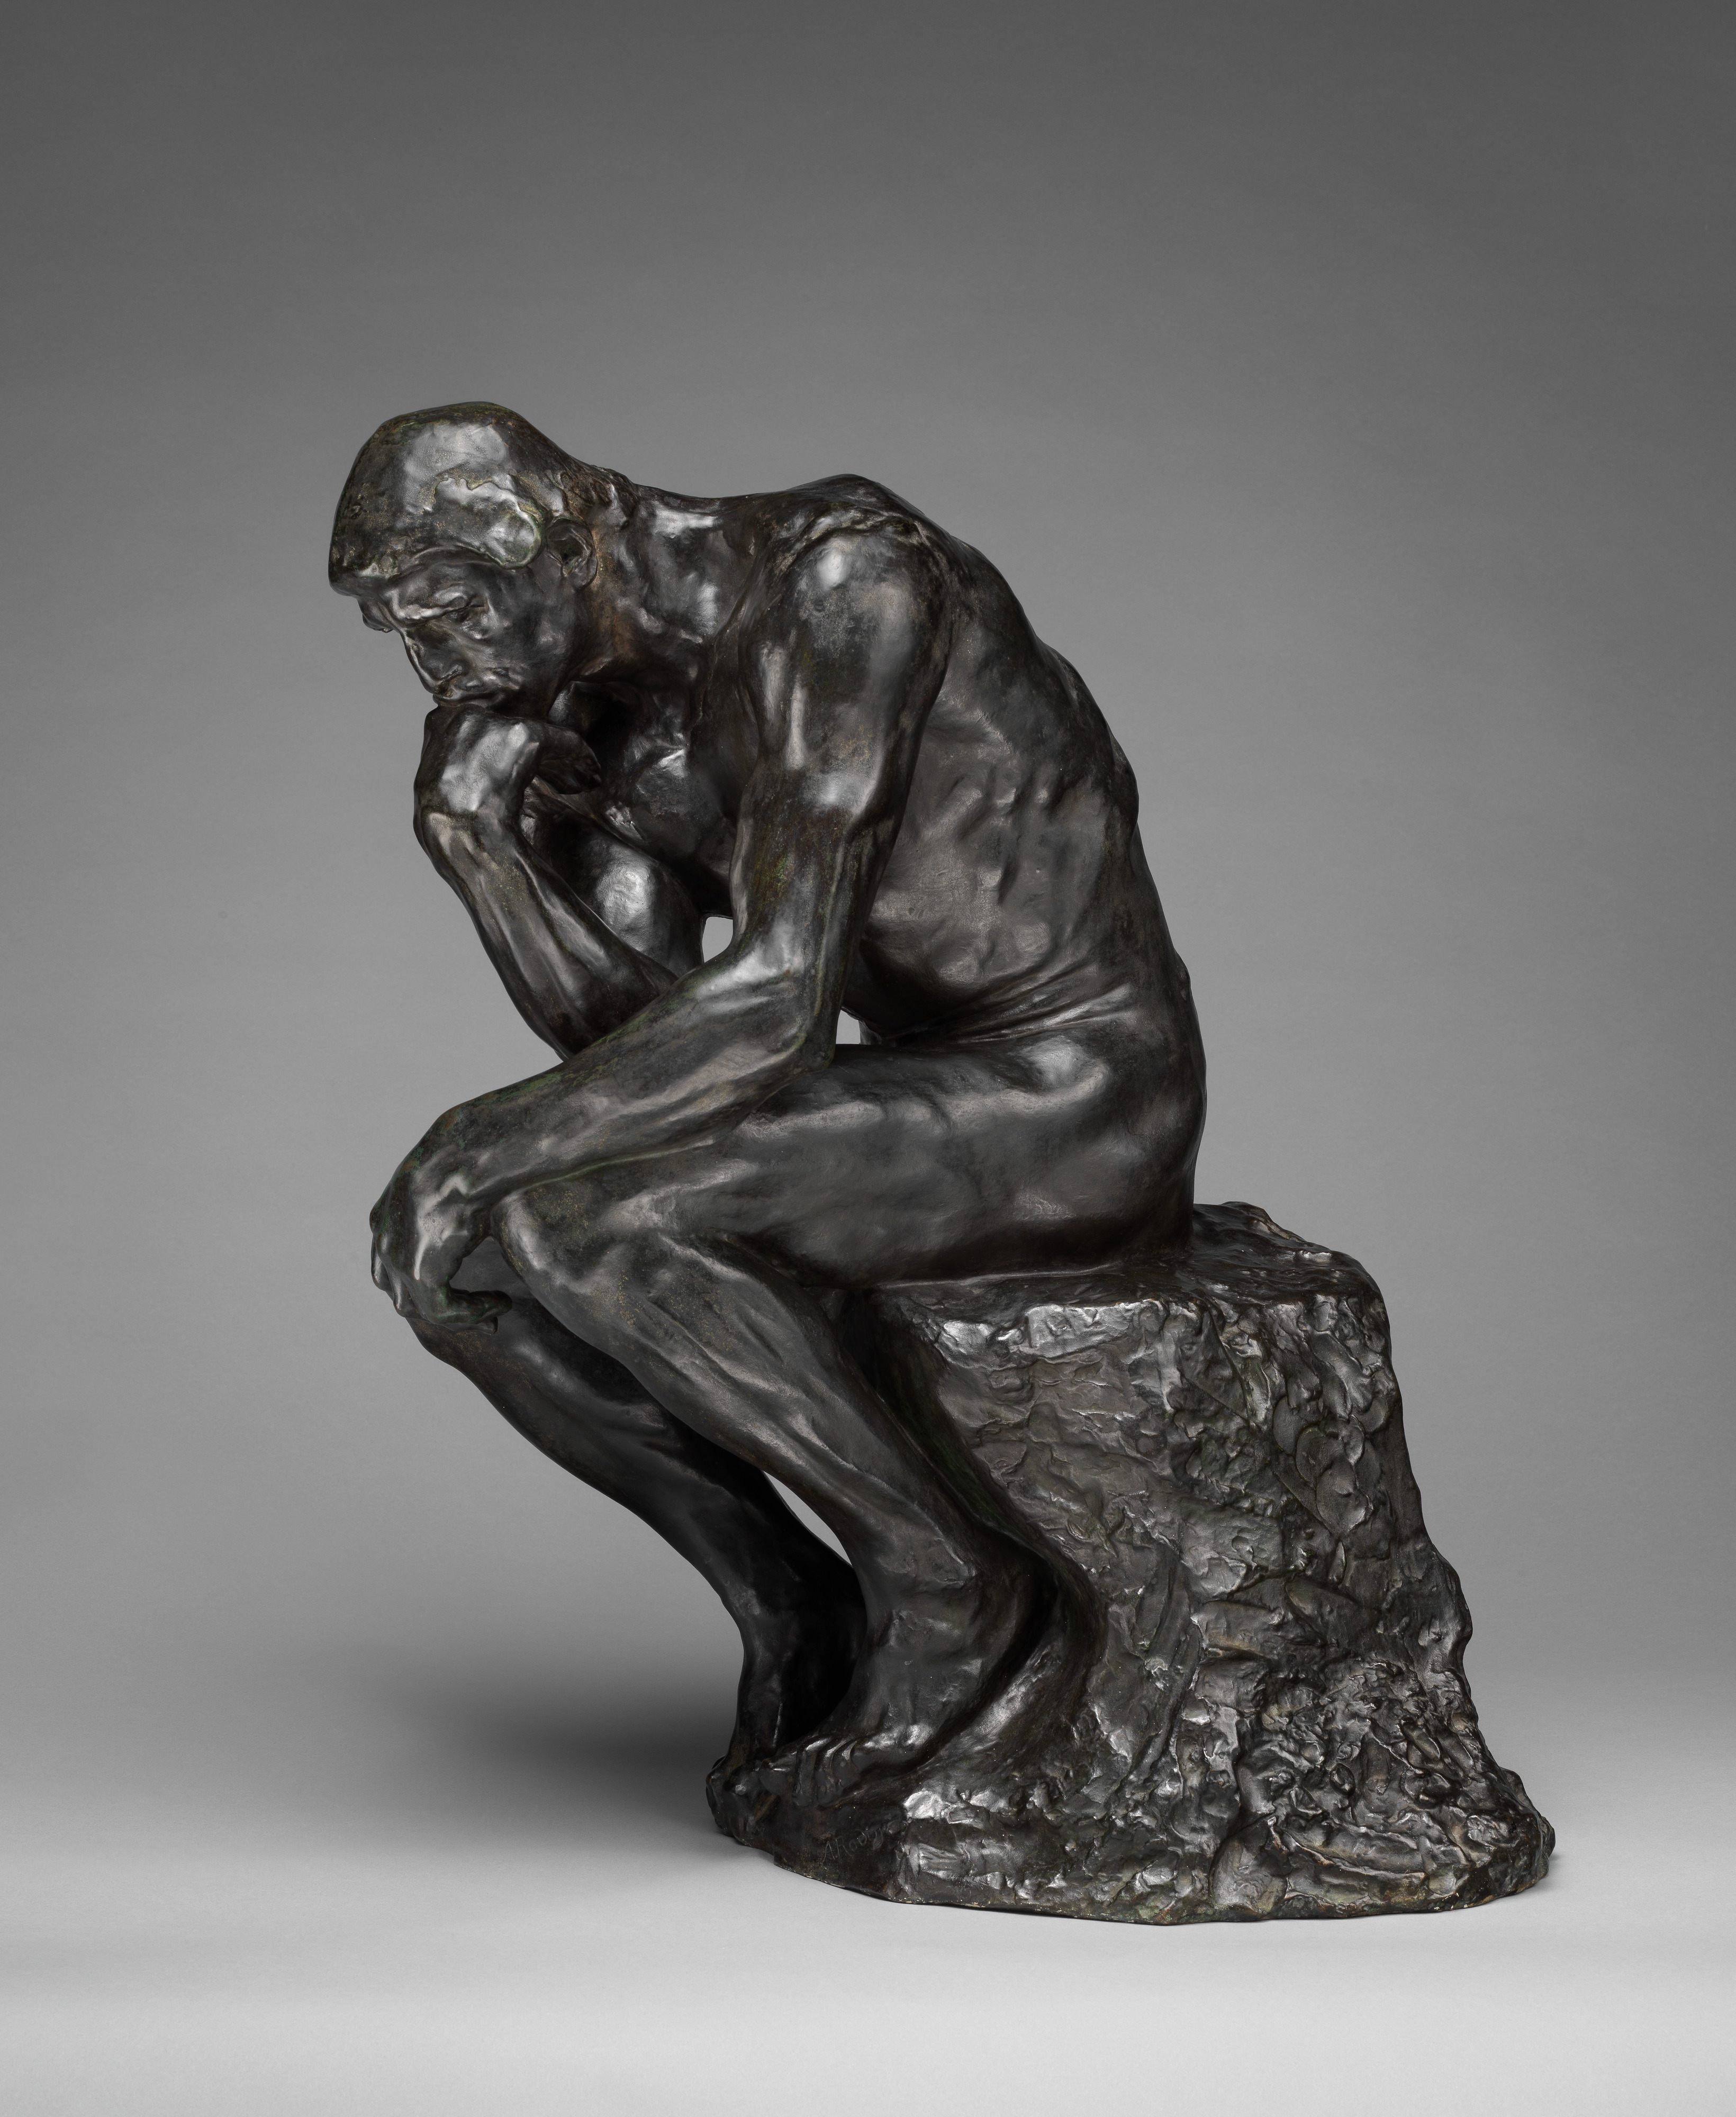 The Thinker at the Pentagon